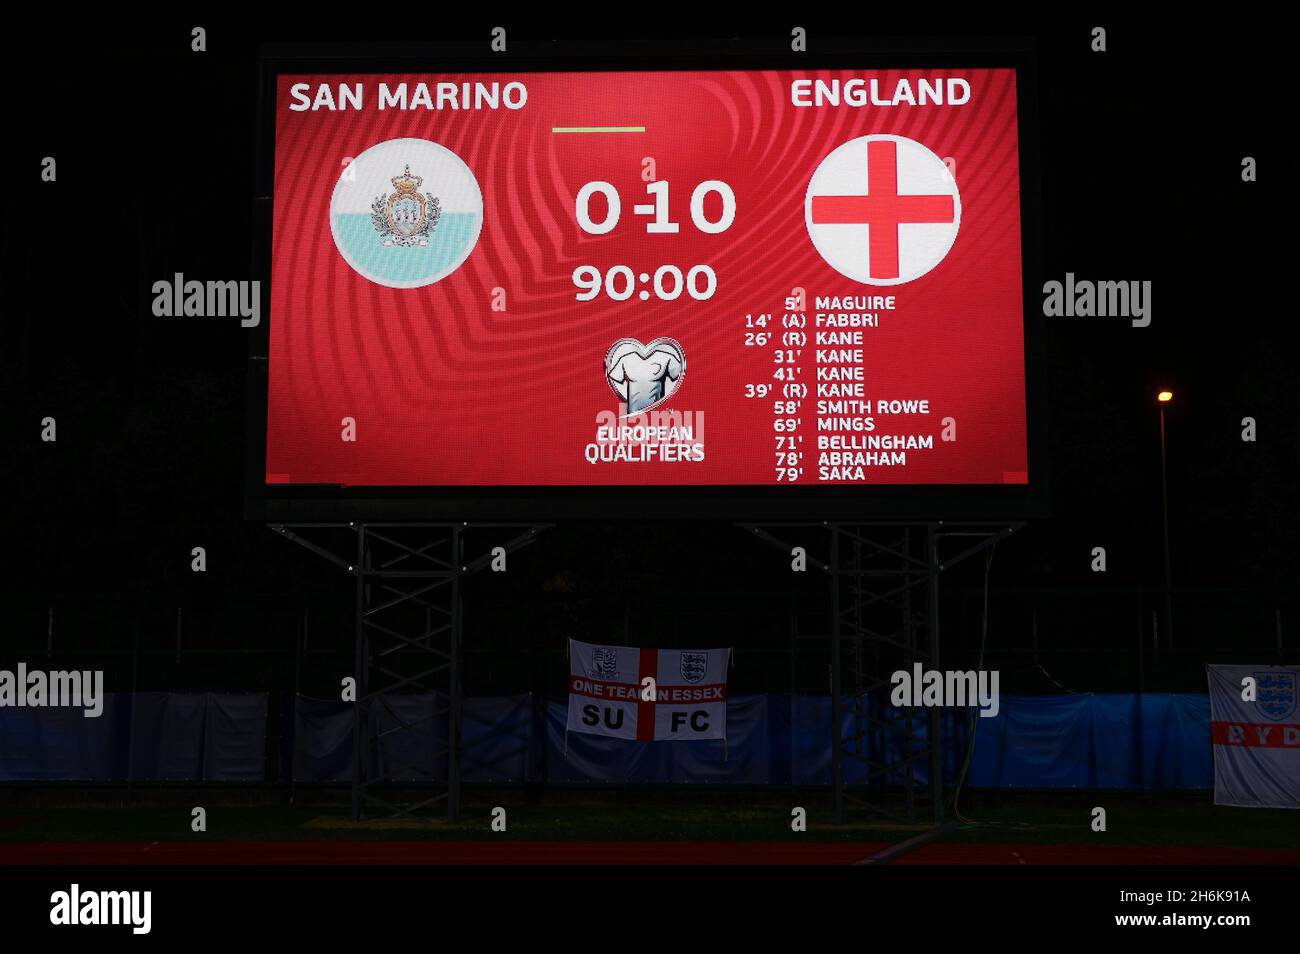 Serravalle, San Marino. 15 November 2021. A scoreboard show the final result of the 2022 FIFA World Cup European Qualifier football match between San Marino and England. Credit: Nicolò Campo/Alamy Live News Stock Photo